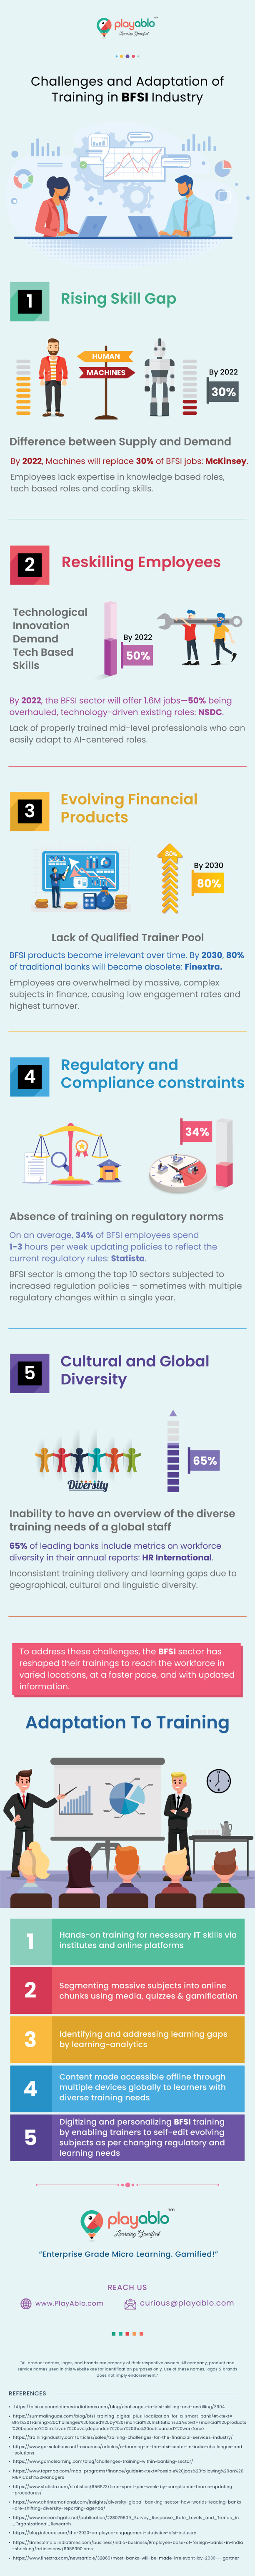 Challenges and Adaptation of BFSI Training in Industry Infographic